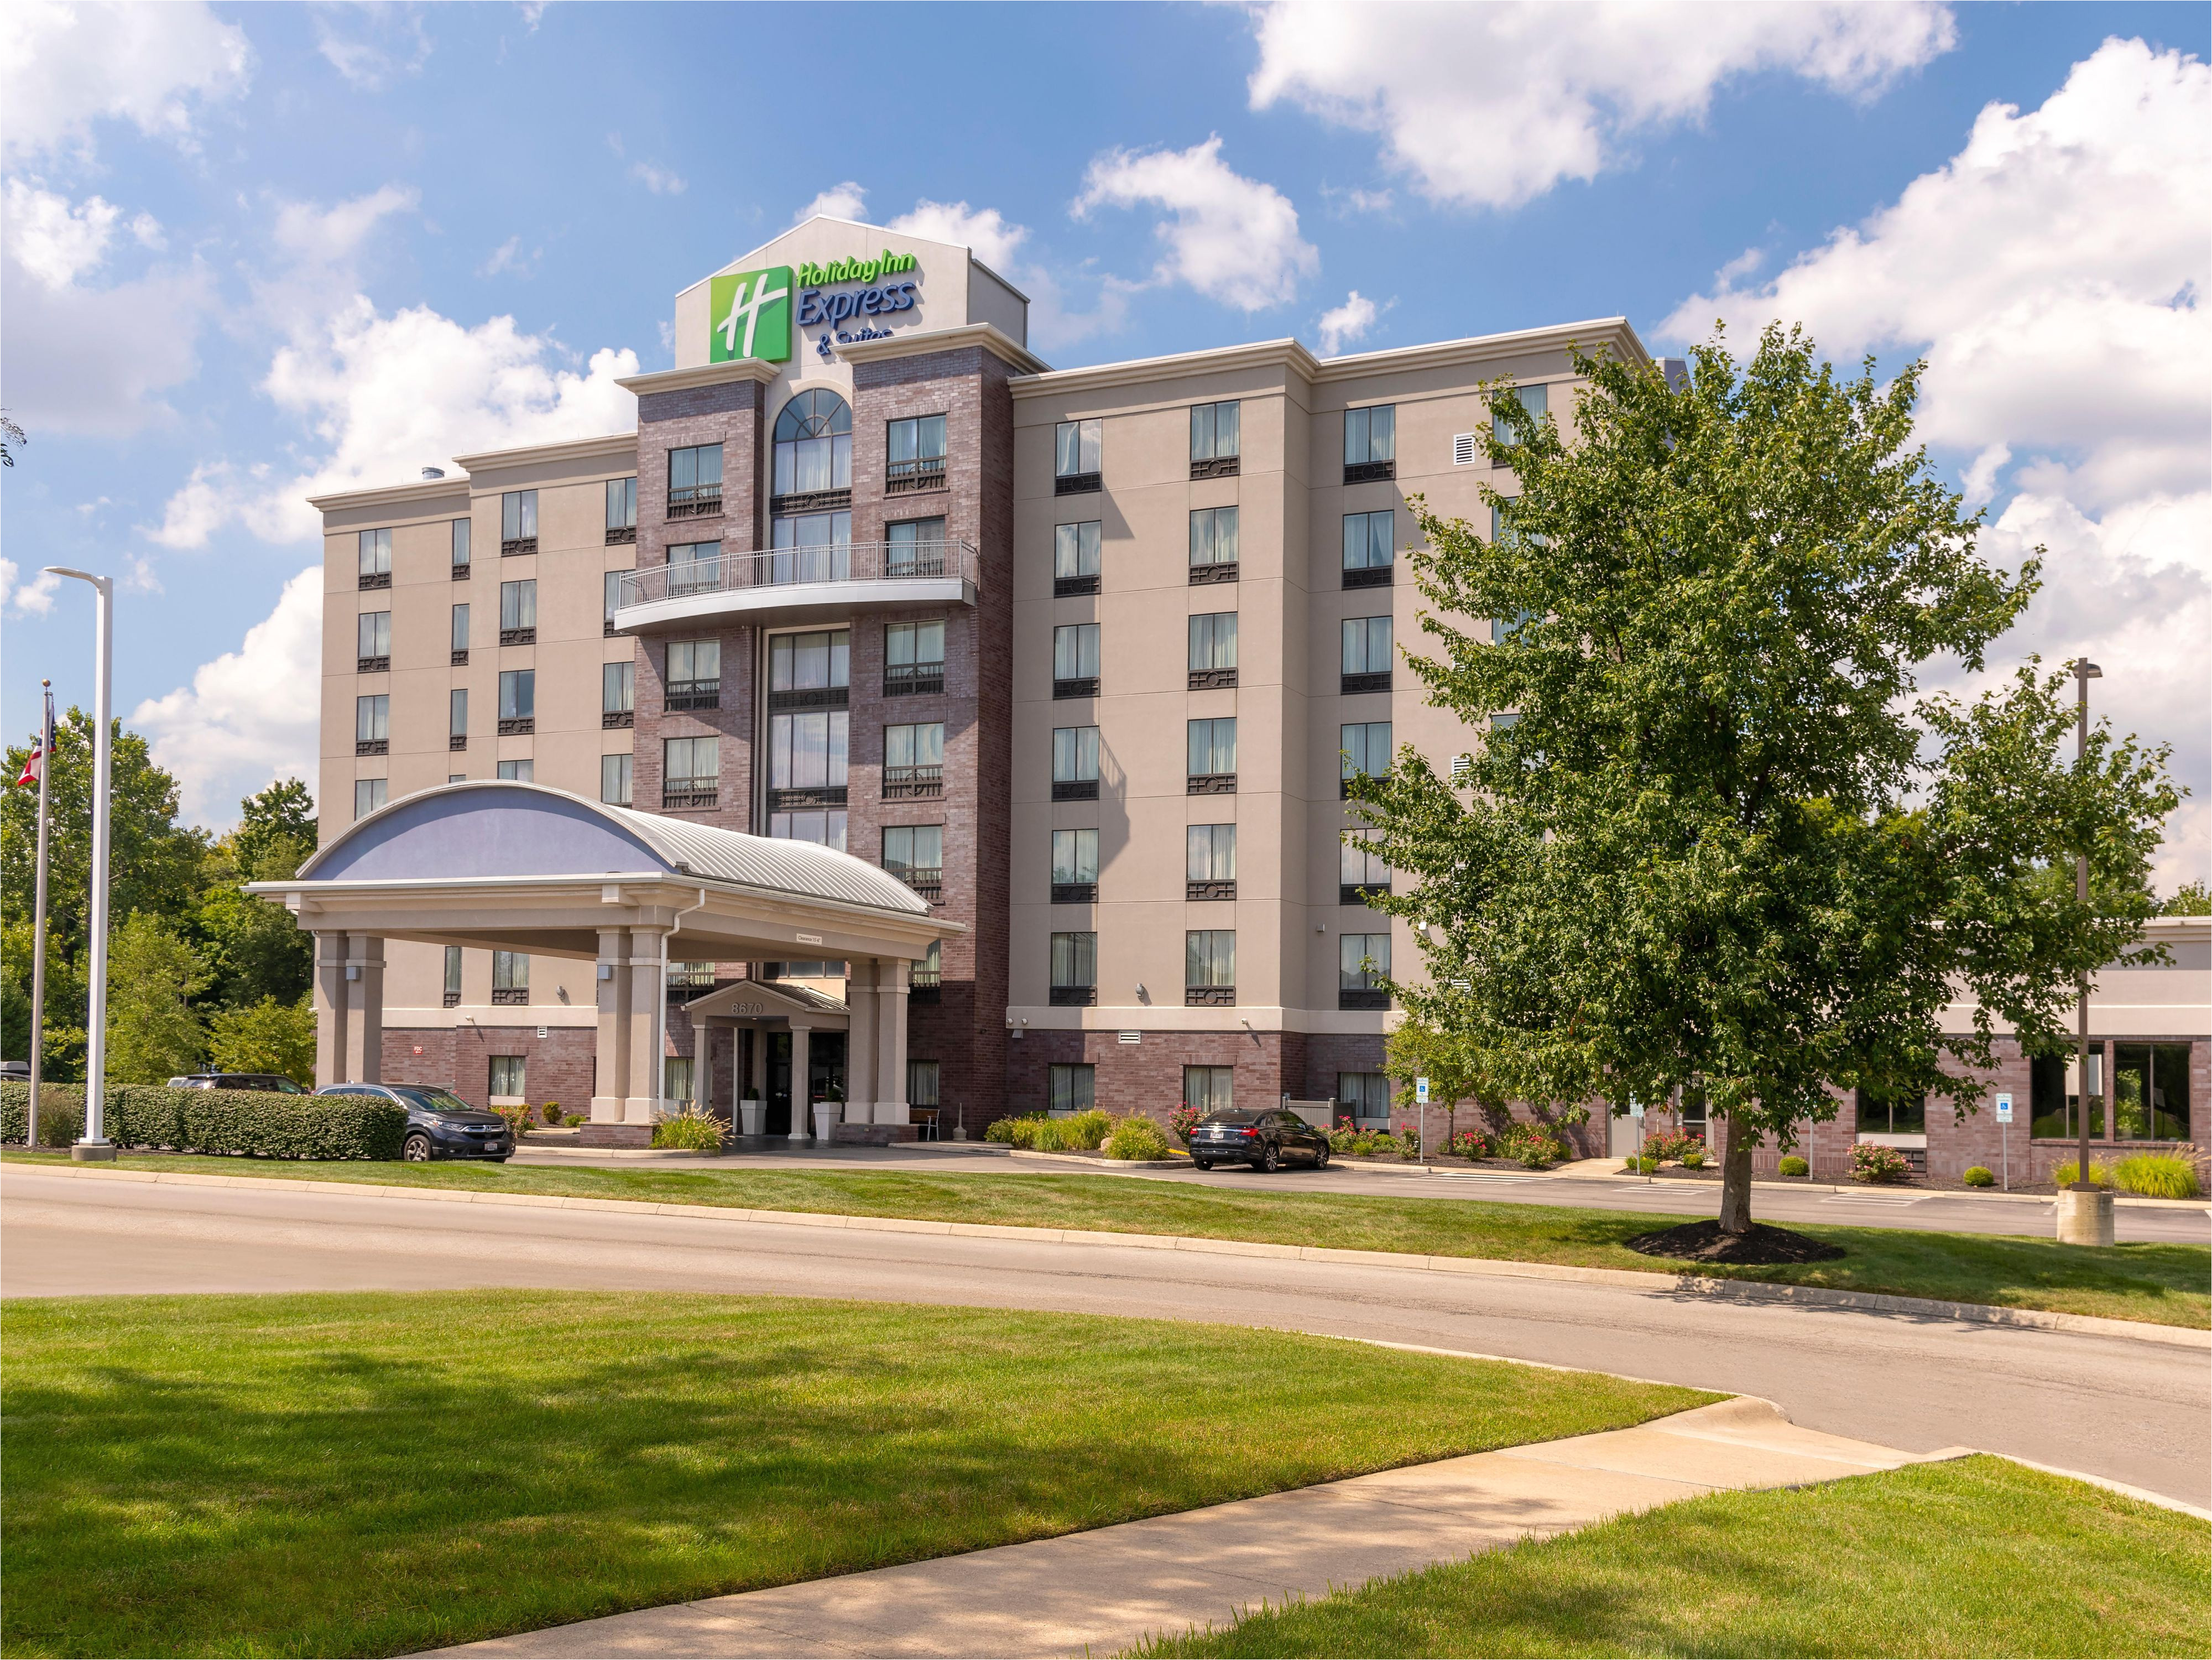 holiday inn express and suites columbus 5679078361 4x3